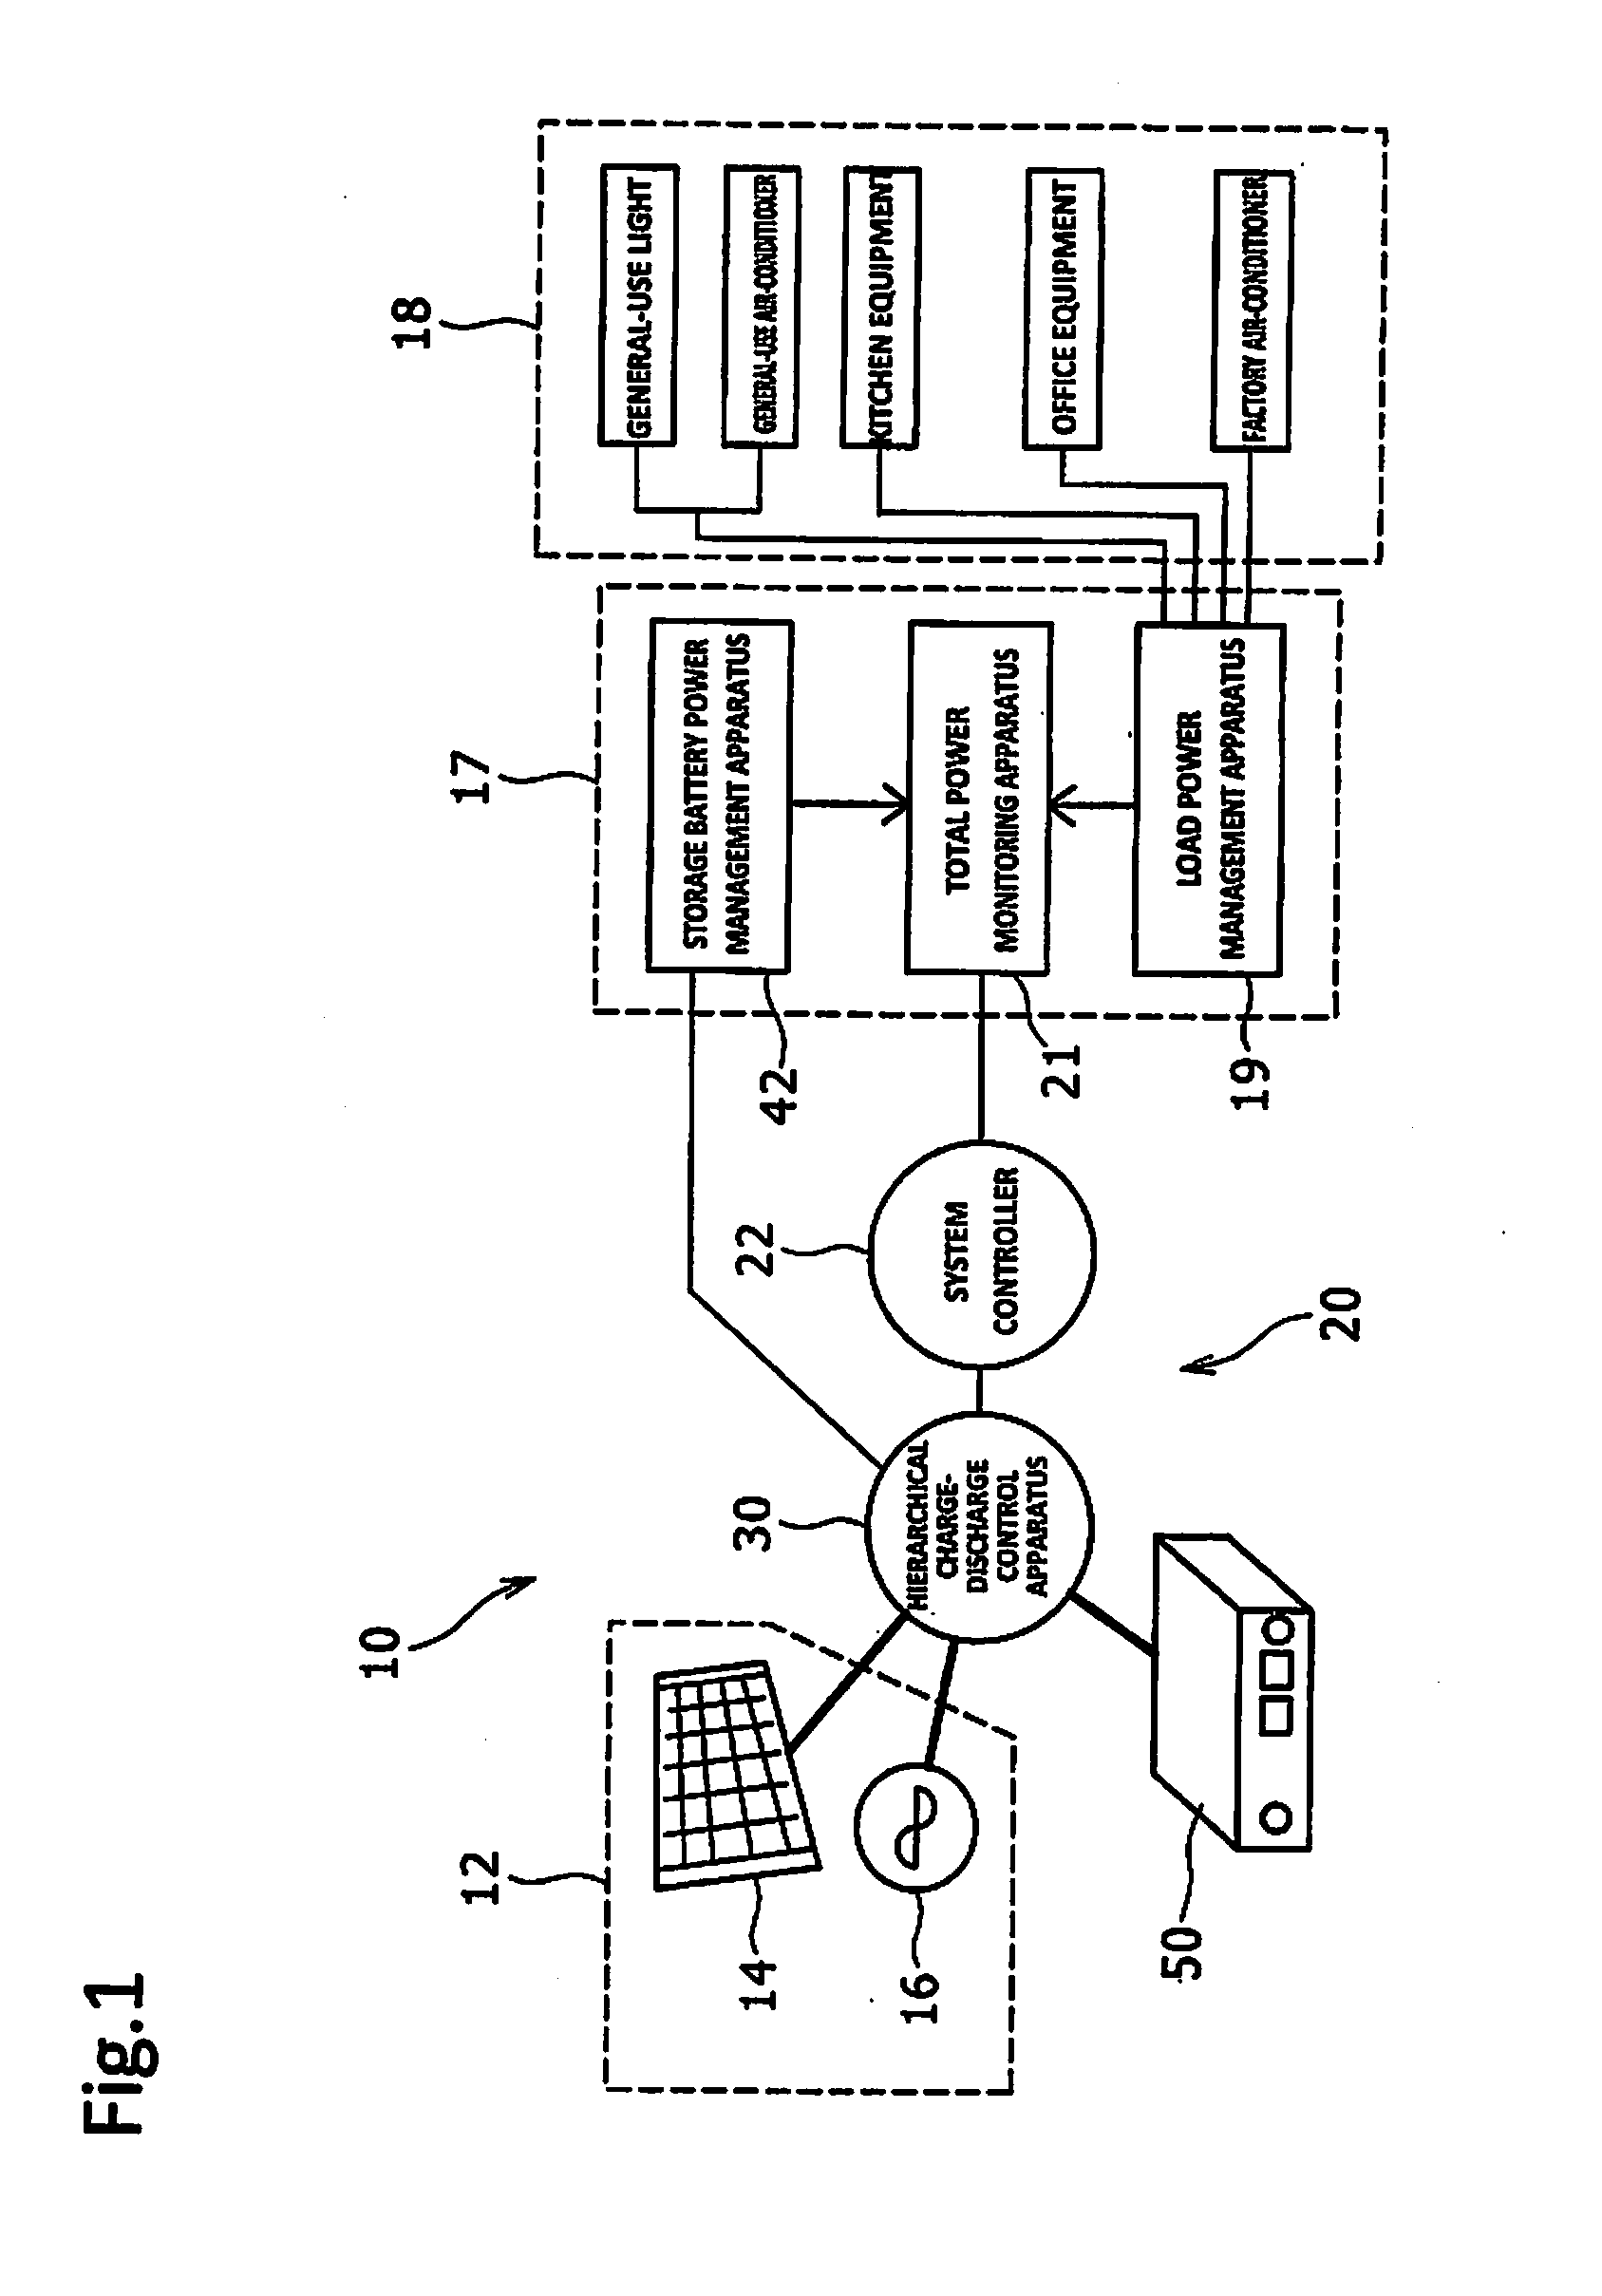 Power management system